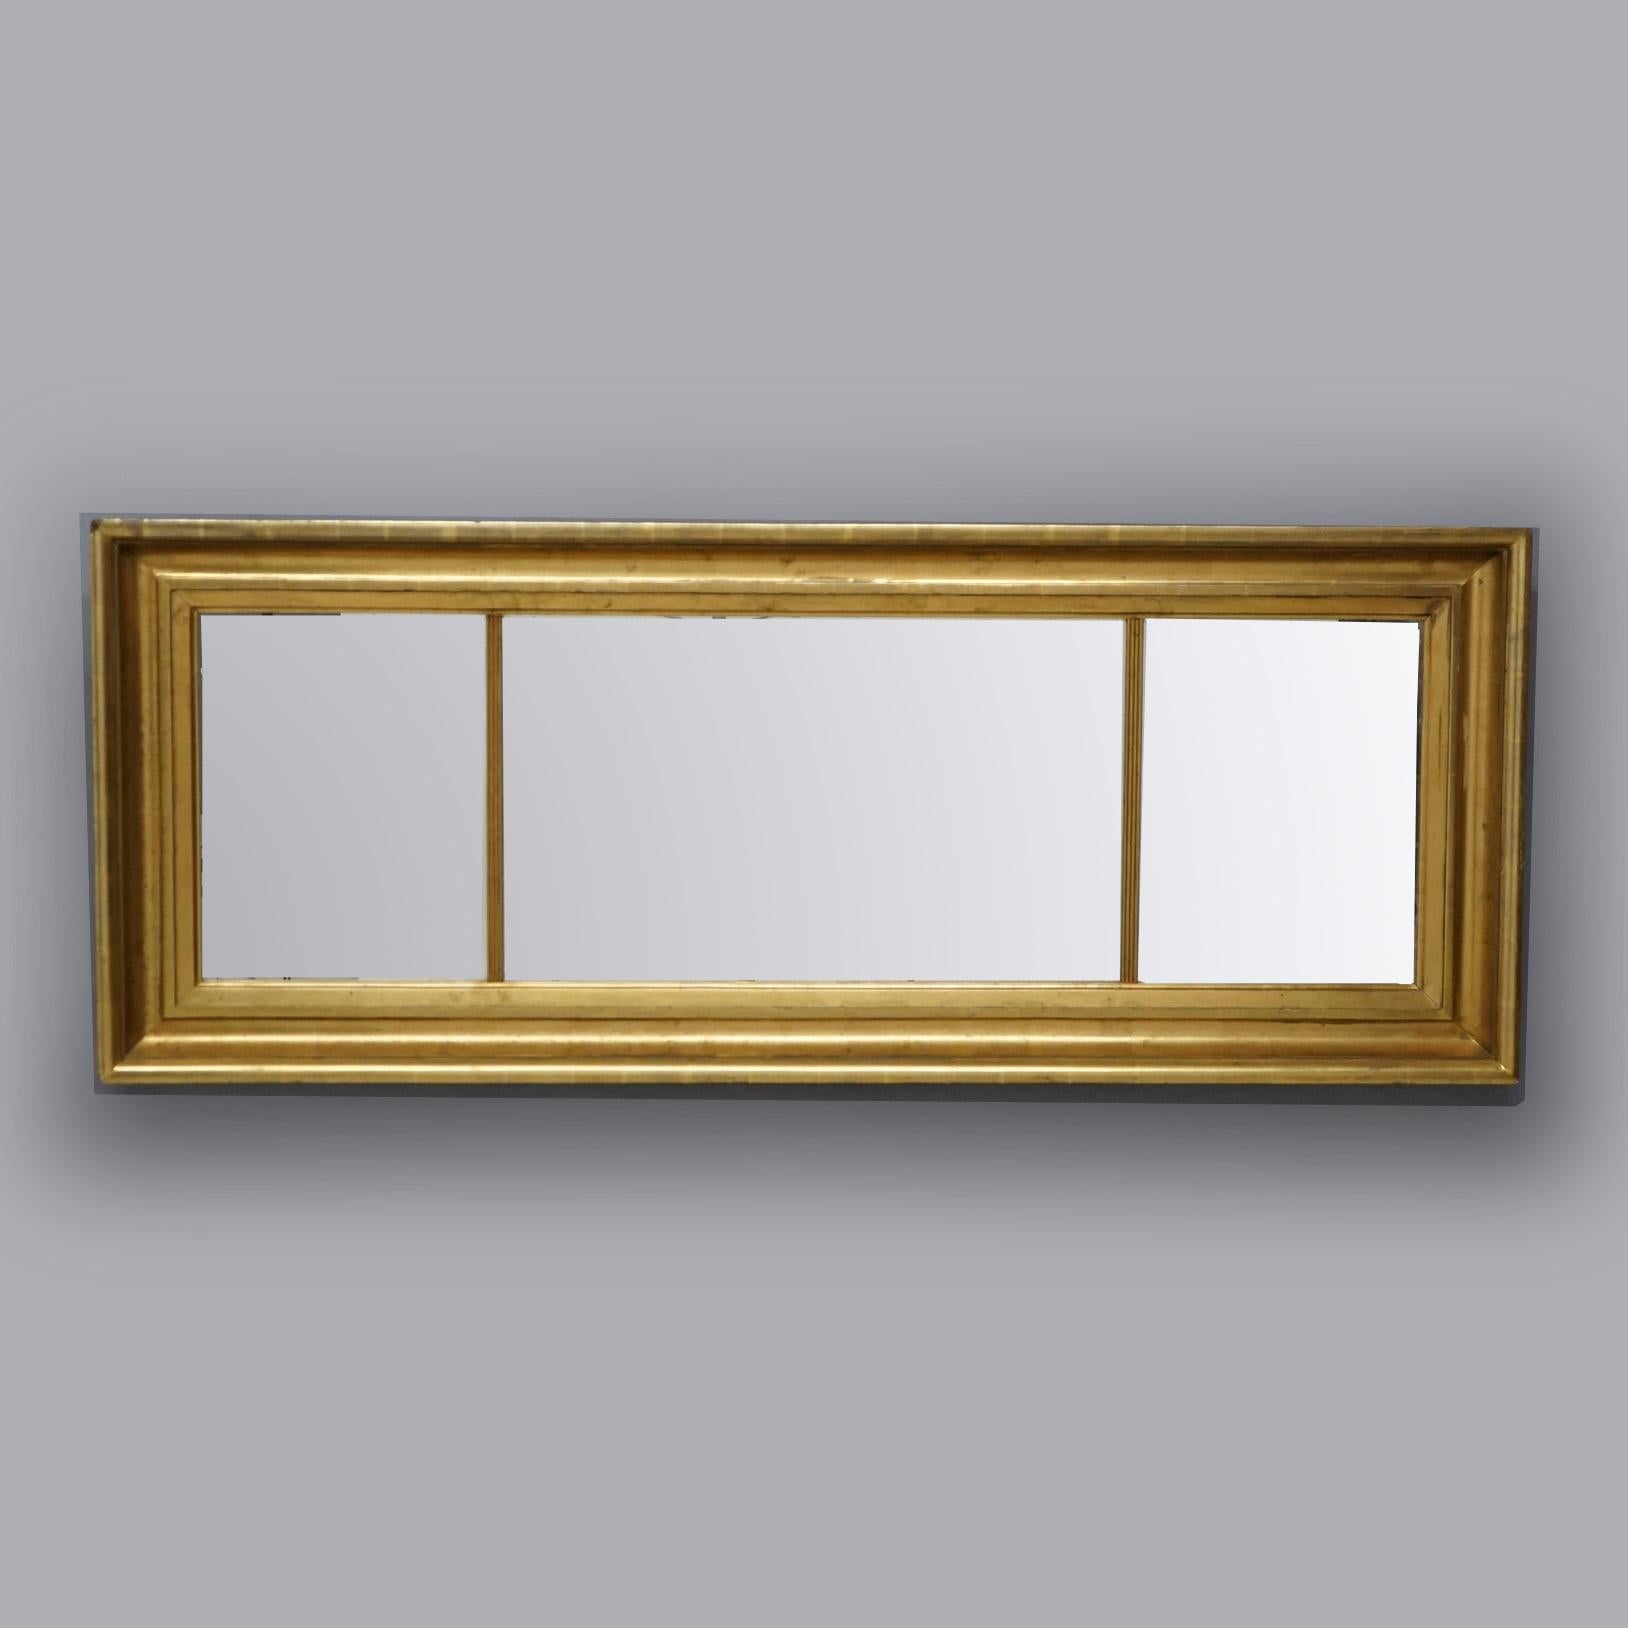 An antique American Empire triptych wall mirror offers giltwood frame having reeded dividers, c1850

Measures - 26.75